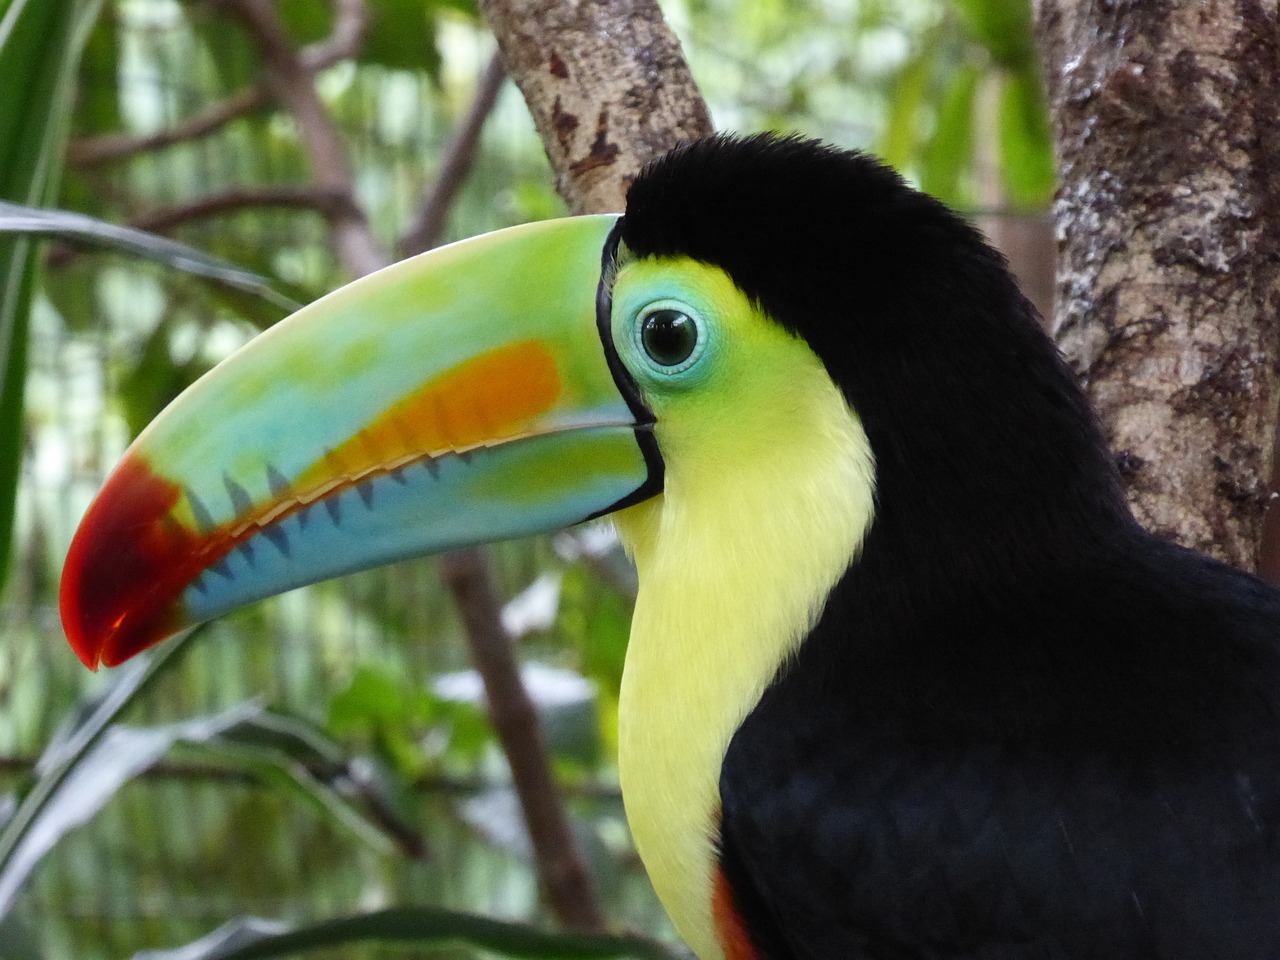 a close up of a colorful bird on a tree, flickr, 6 toucan beaks, closeup of the face, in marijuanas gardens, birds - eye view